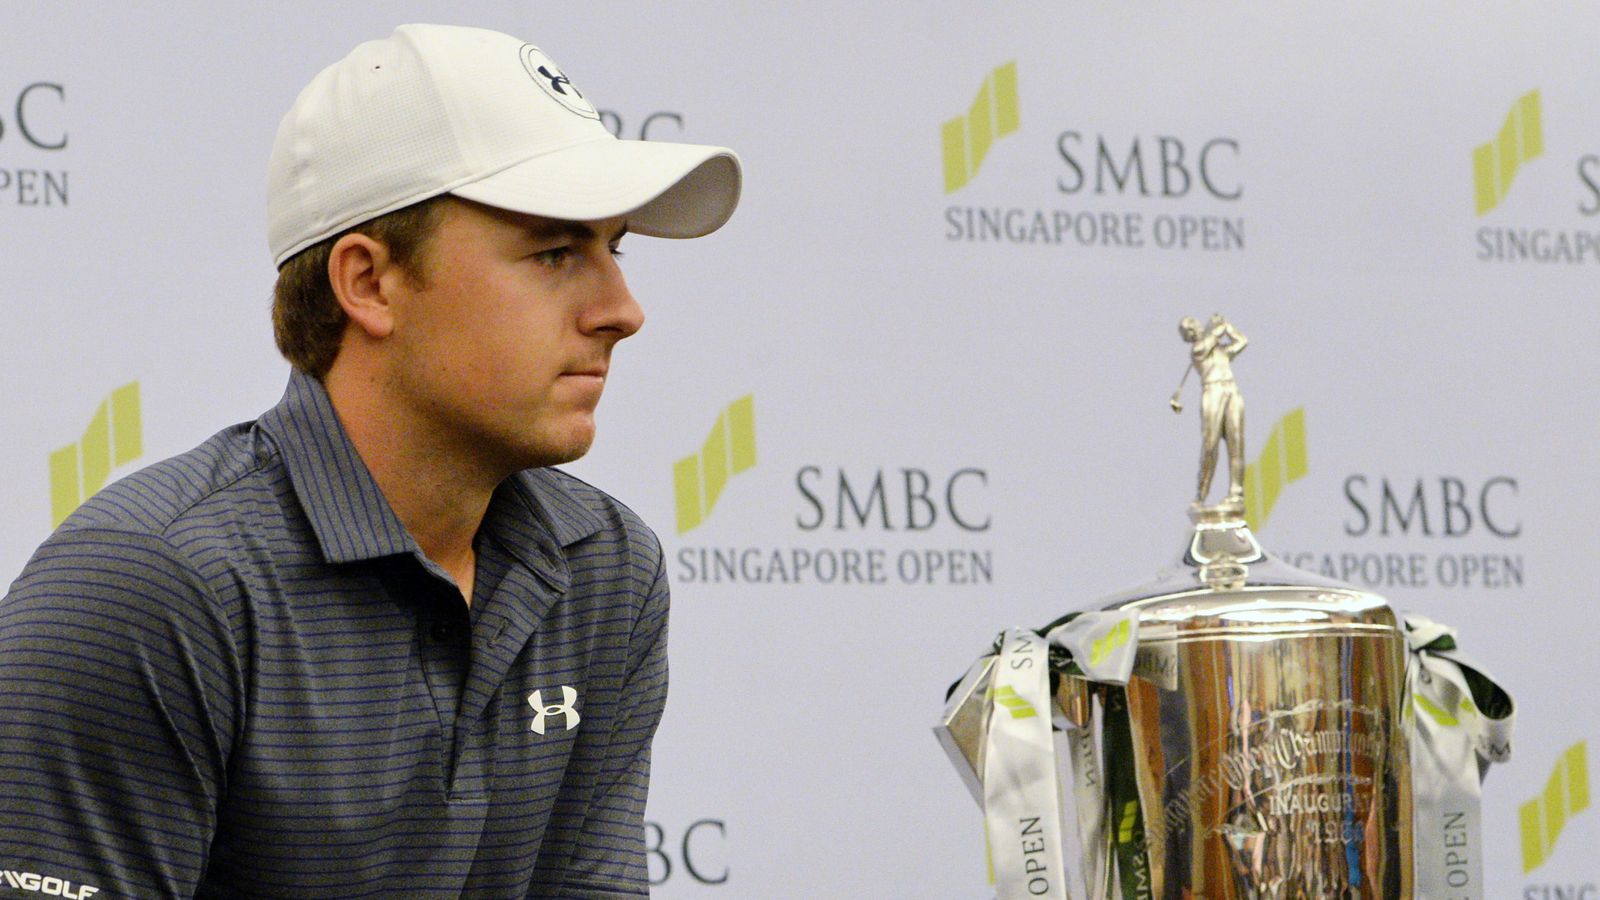 Jordan Spieth continues his busy schedule at the Singapore Open Golf